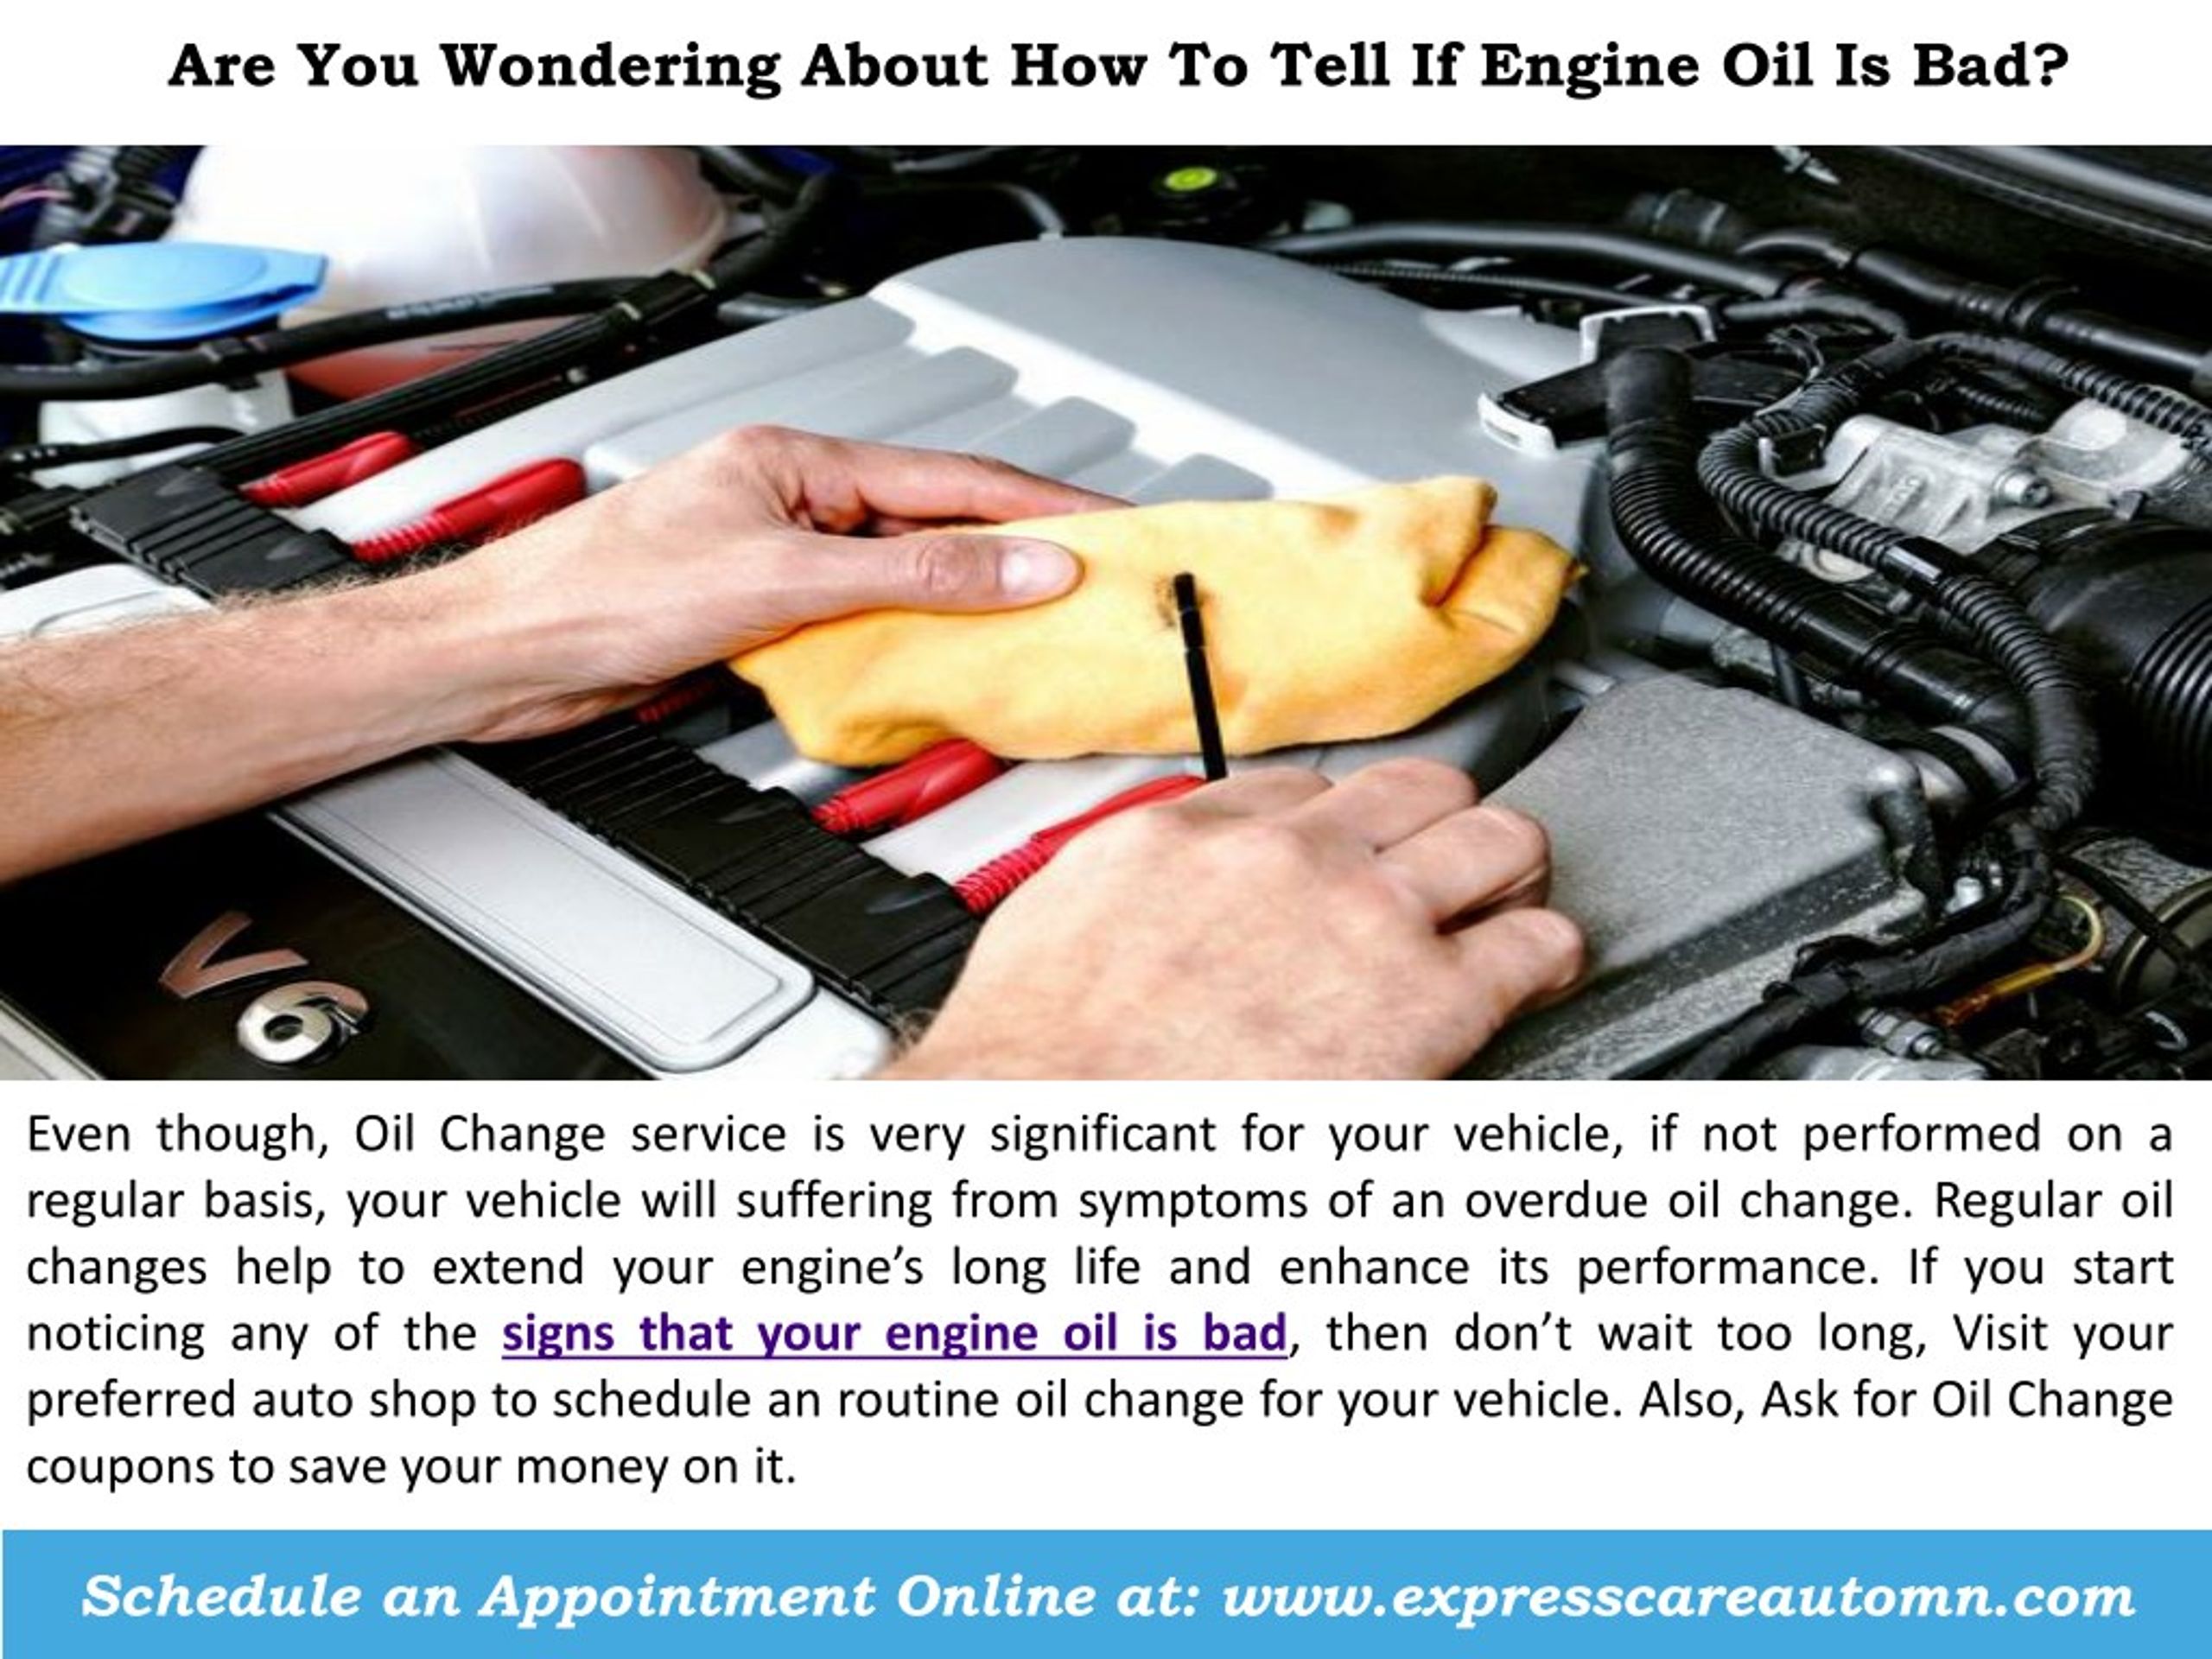 PPT - You May Wonder of How to Tell if Engine Oil is Bad For Your ...